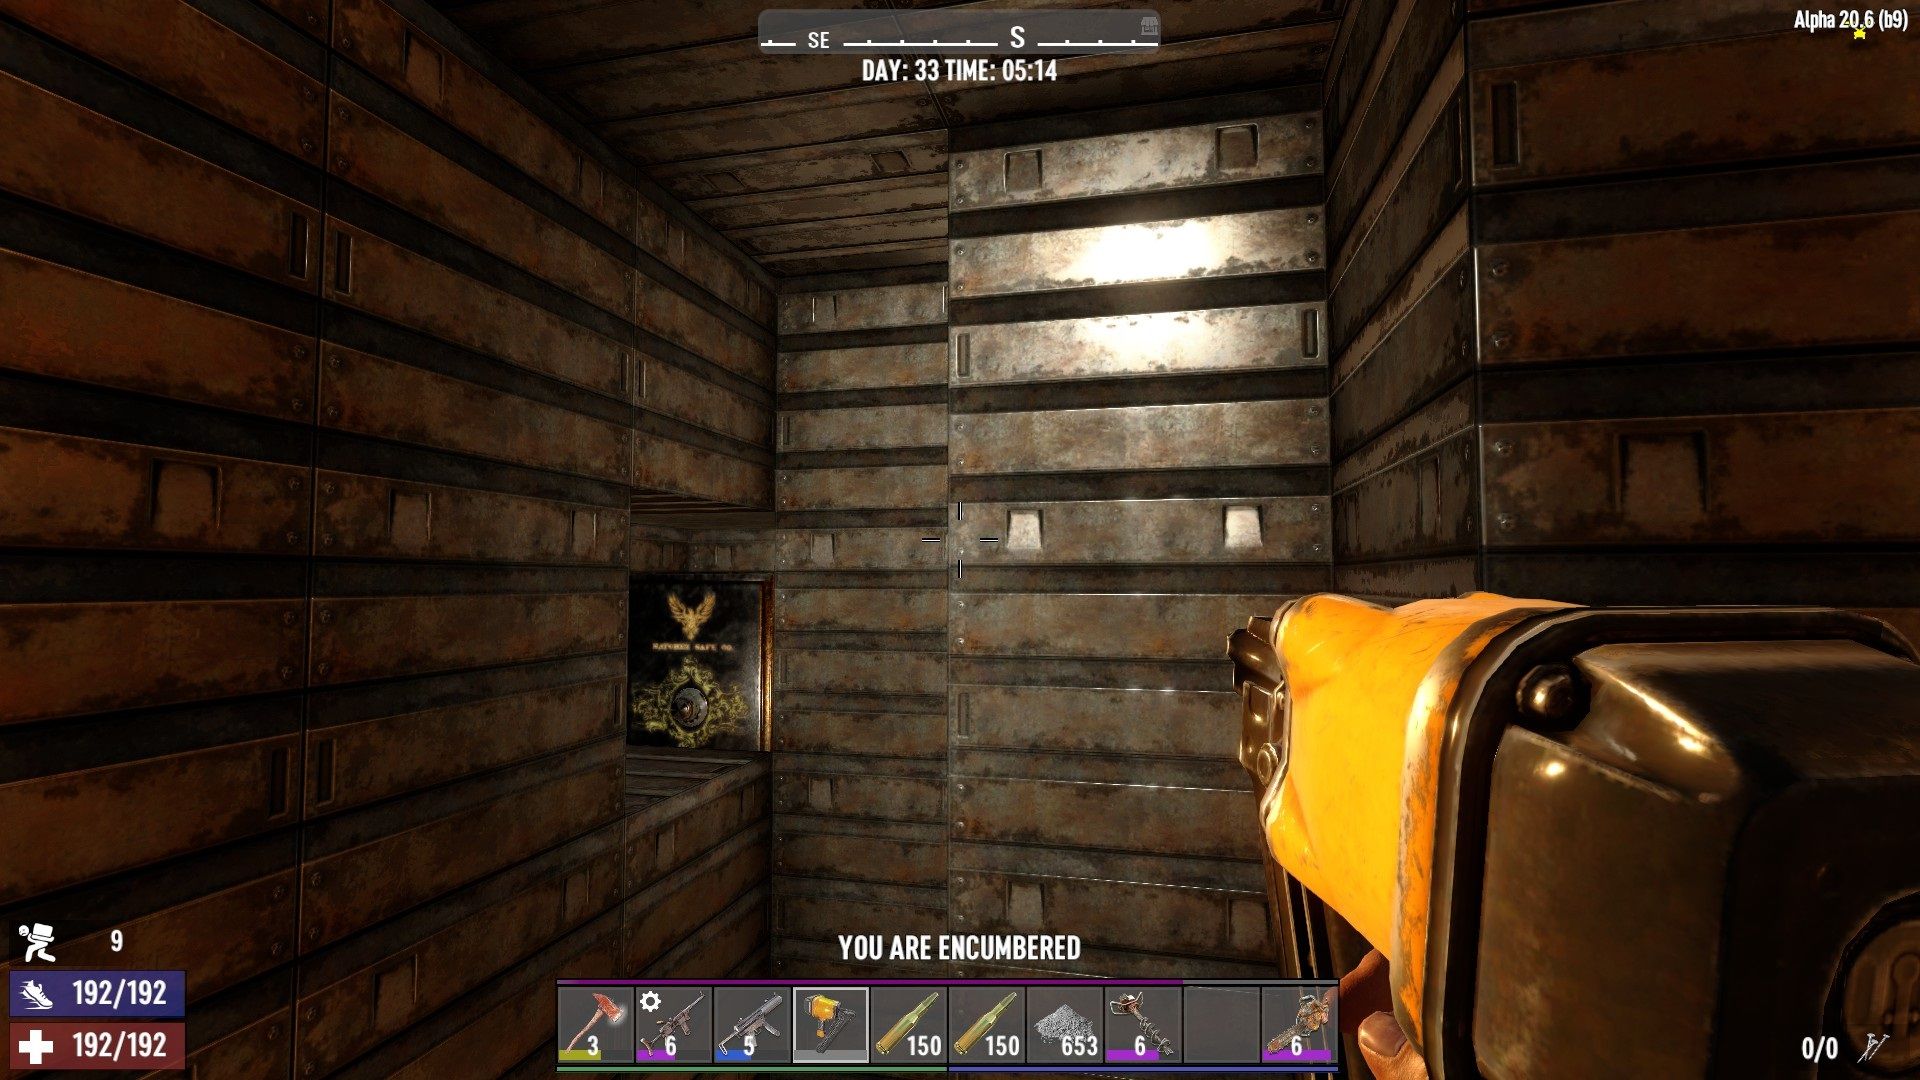 double walled panic room 7 days to die.jpg